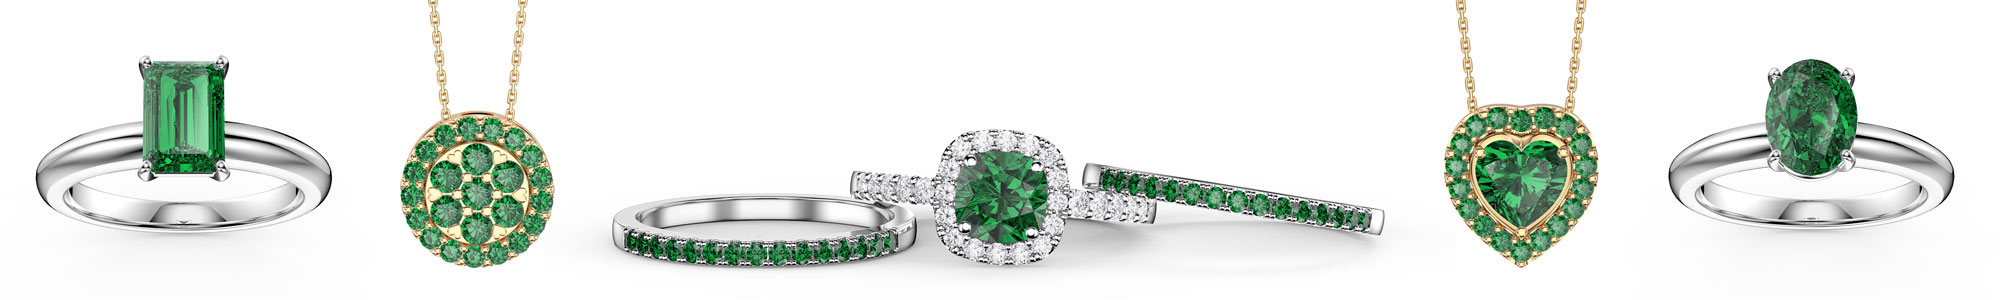 Emerald Jewellery - Wide Selection of Earrings, Pendants, Engagement Rings, Bracelets and Necklaces